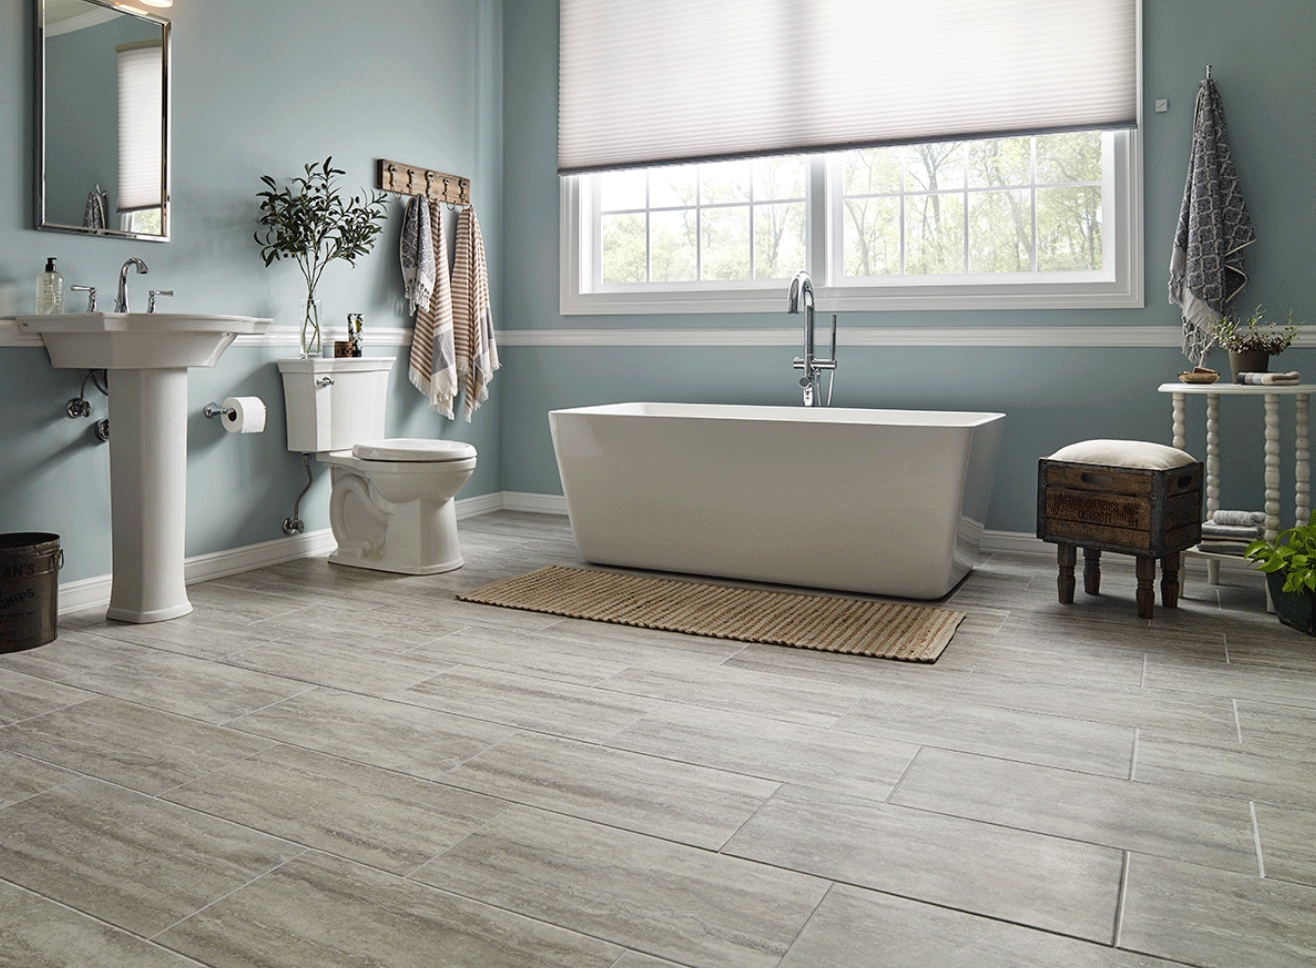 How Does Porcelain Tile Fare in Moisture-Prone Areas?